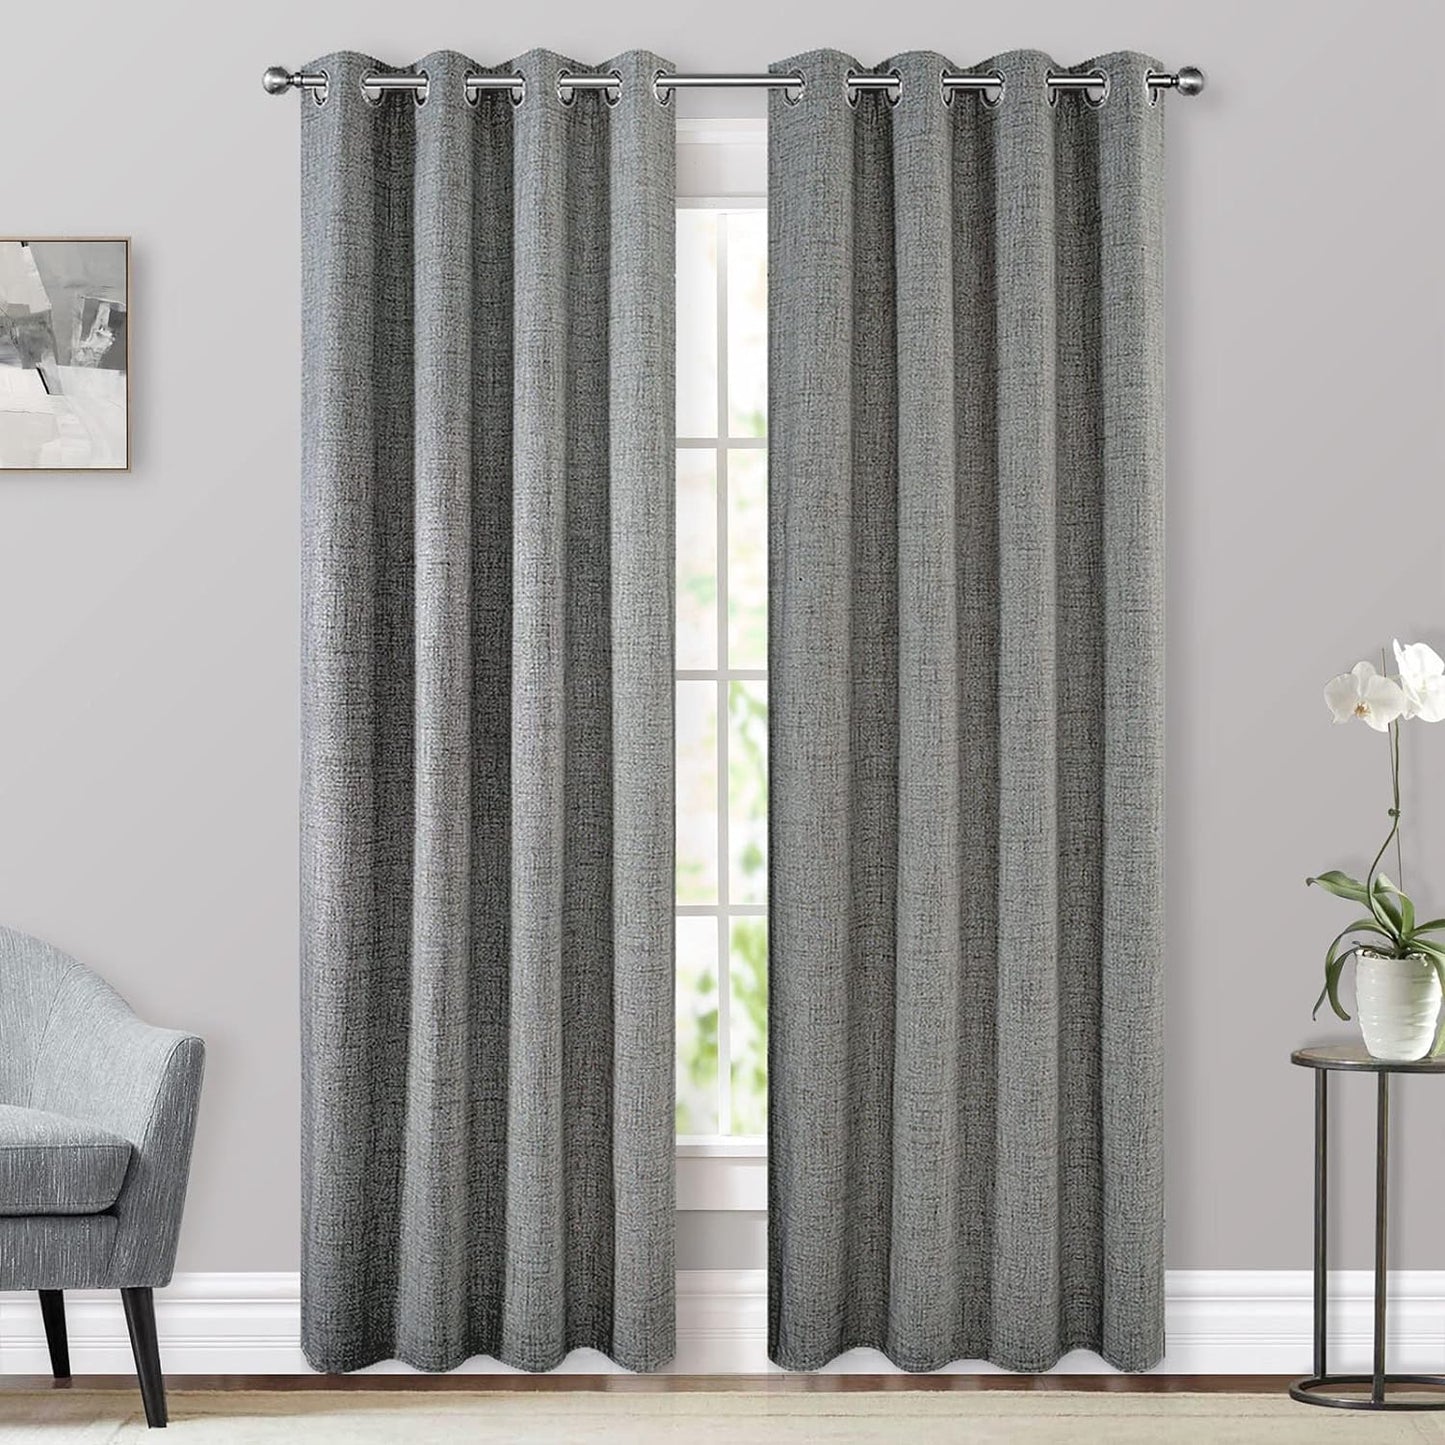 CUCRAF 100% Blackout Window Curtains for Bedroom Noise Reducing,Thermal Insulated Room Darkening Grommet Drapes for Living Room,2 Panels Sets(52 X 95 Inches, Light Khaki)  CUCRAF Light Grey 52 X 84 Inches 